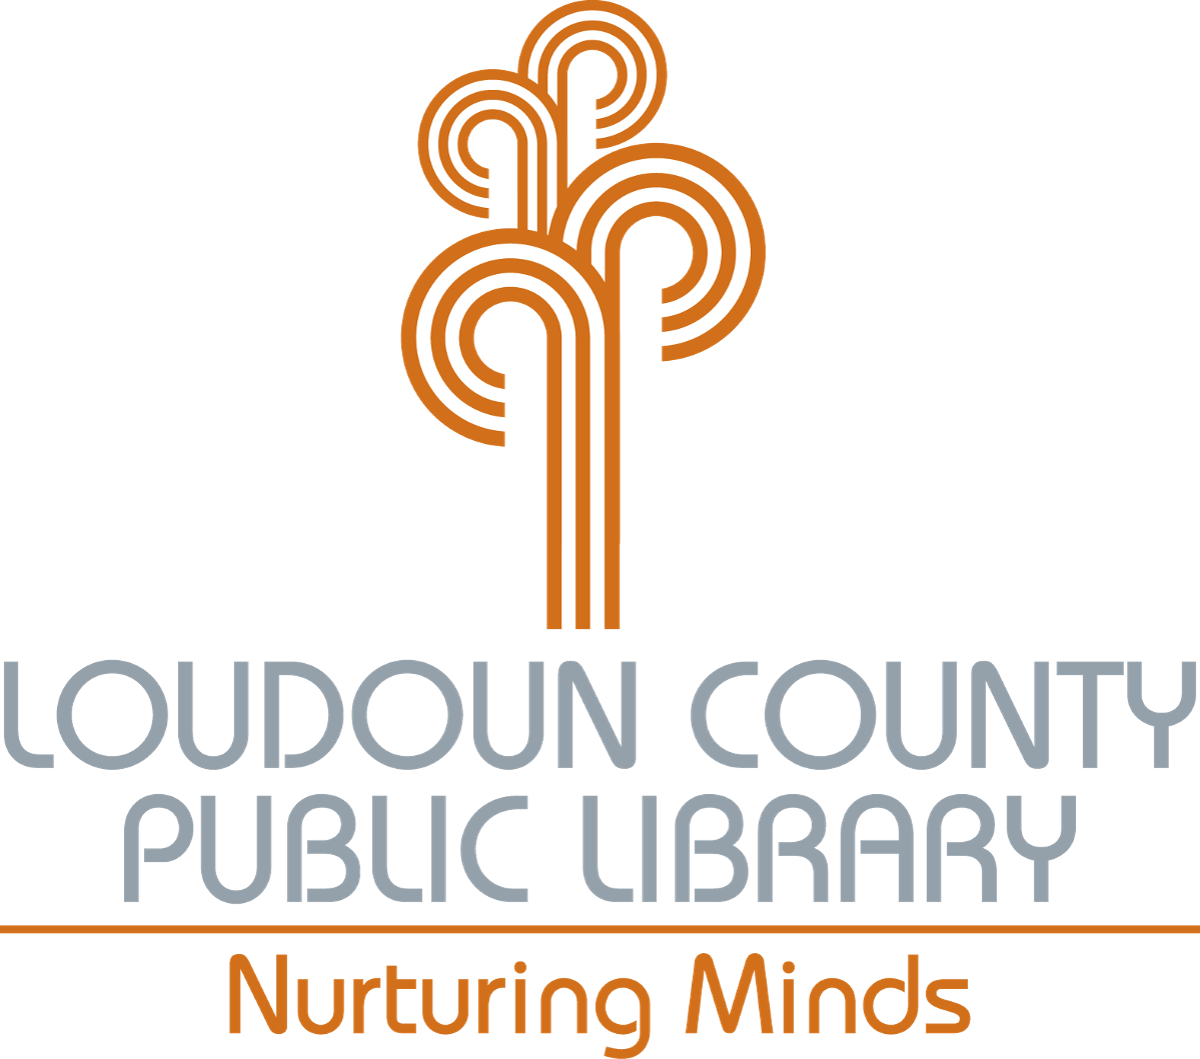 Loudoun County Public Libraries is hosting authors for the festival